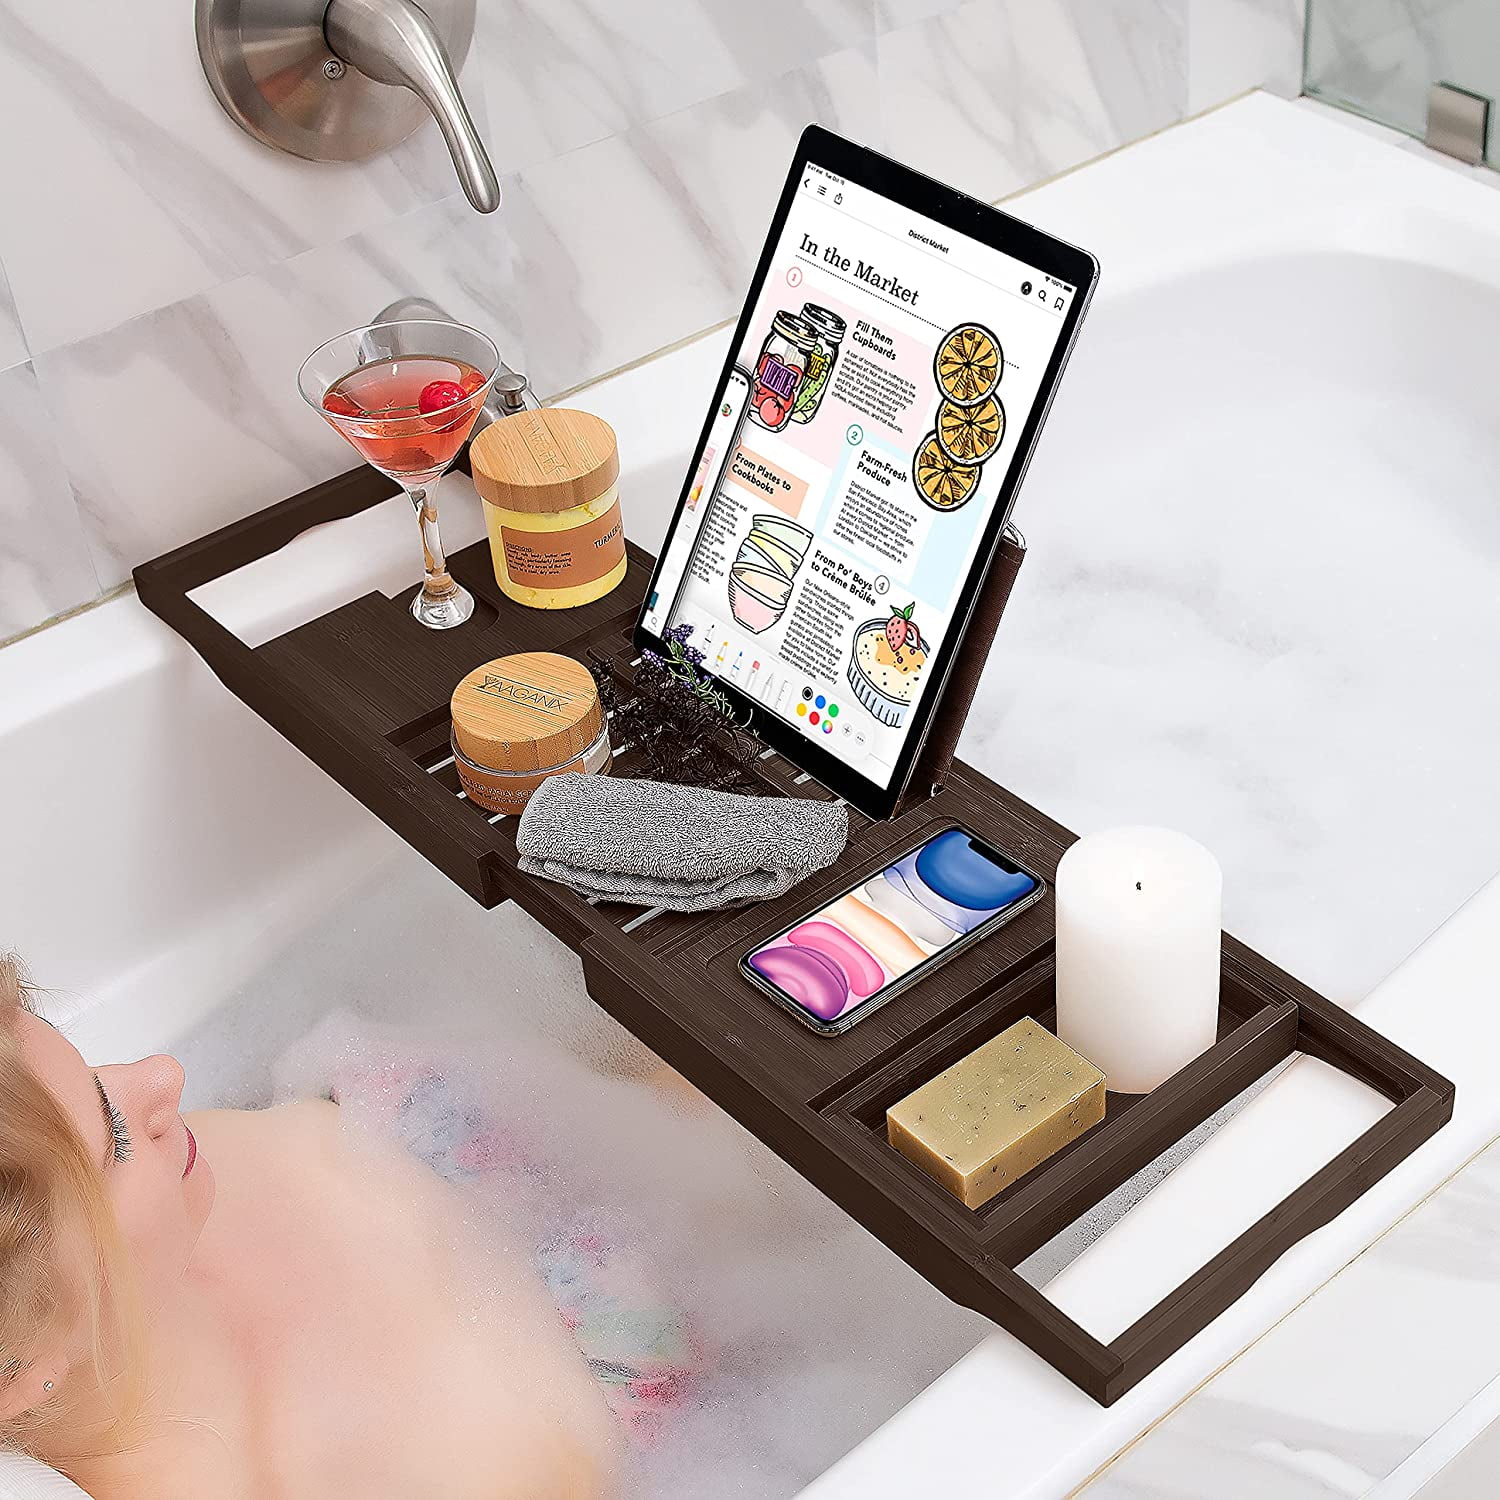 Bambüsi 100% Bamboo Bathtub Caddy with Extending Sides, Reading Rack, Cellphone Tray & Integrated Wine Glass Holder